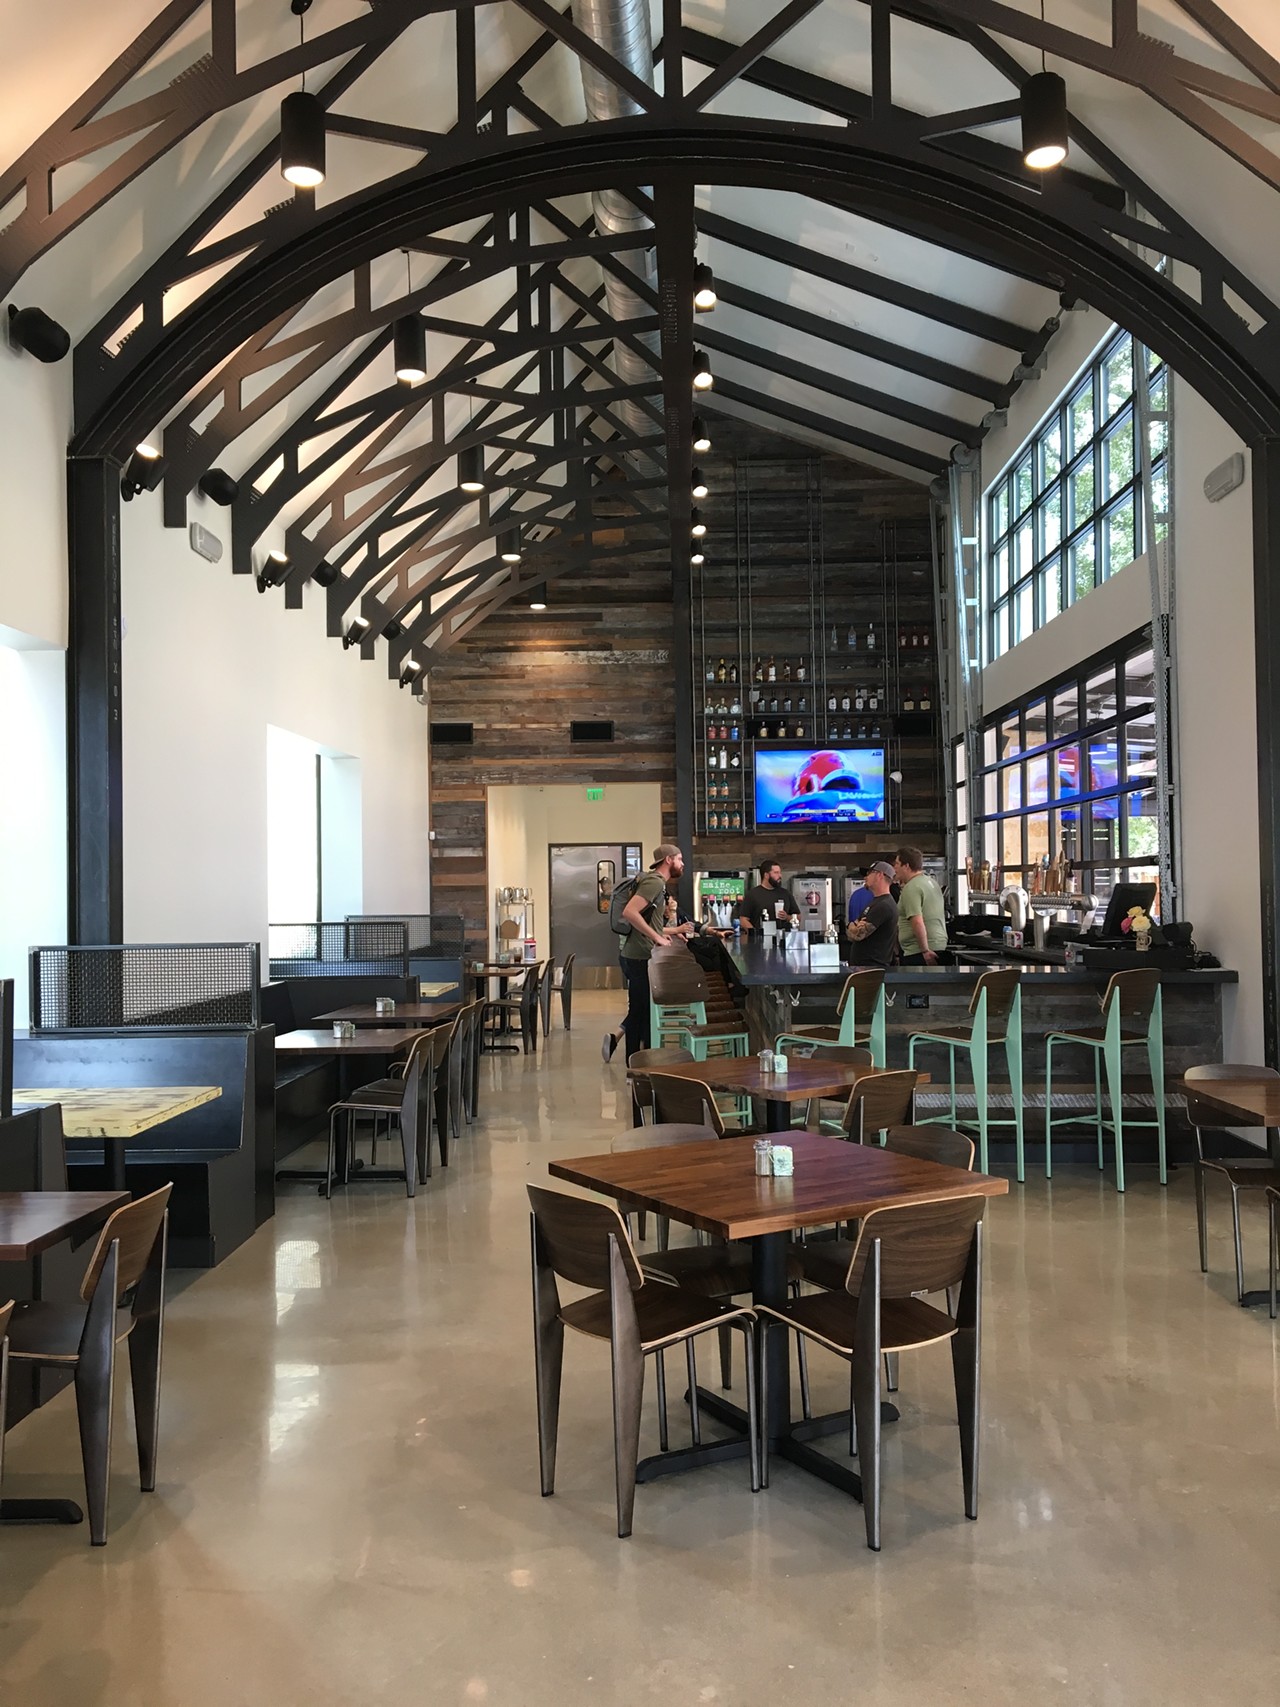 Here's Your First Look at New Braunfels' Newest Restaurant and Bar